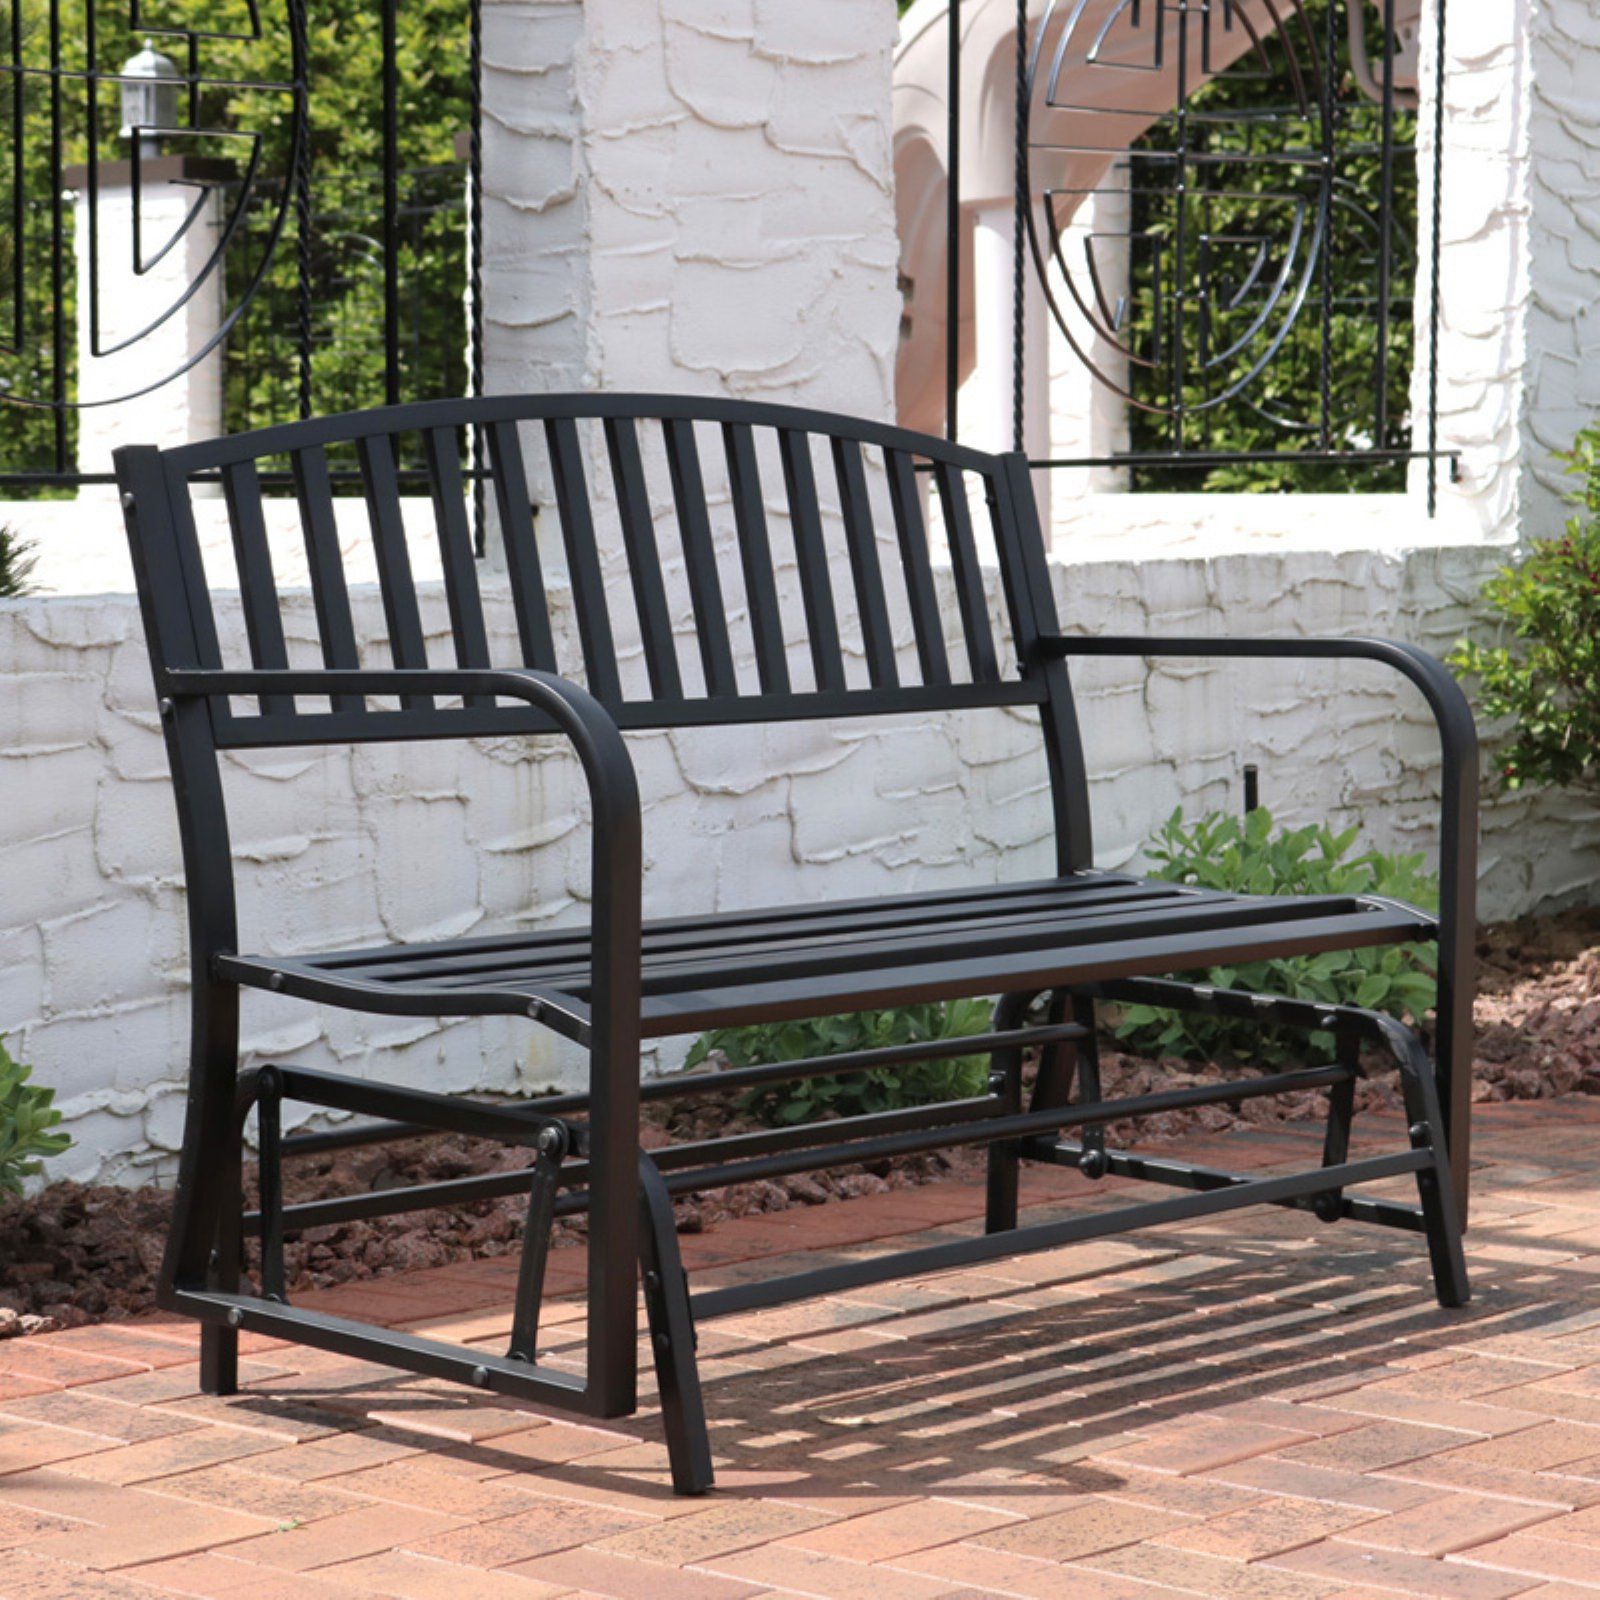 Sunnydaze Decor 4 Ft. Steel Outdoor Glider Bench – Black For Iron Grove Slatted Glider Benches (Photo 10 of 26)